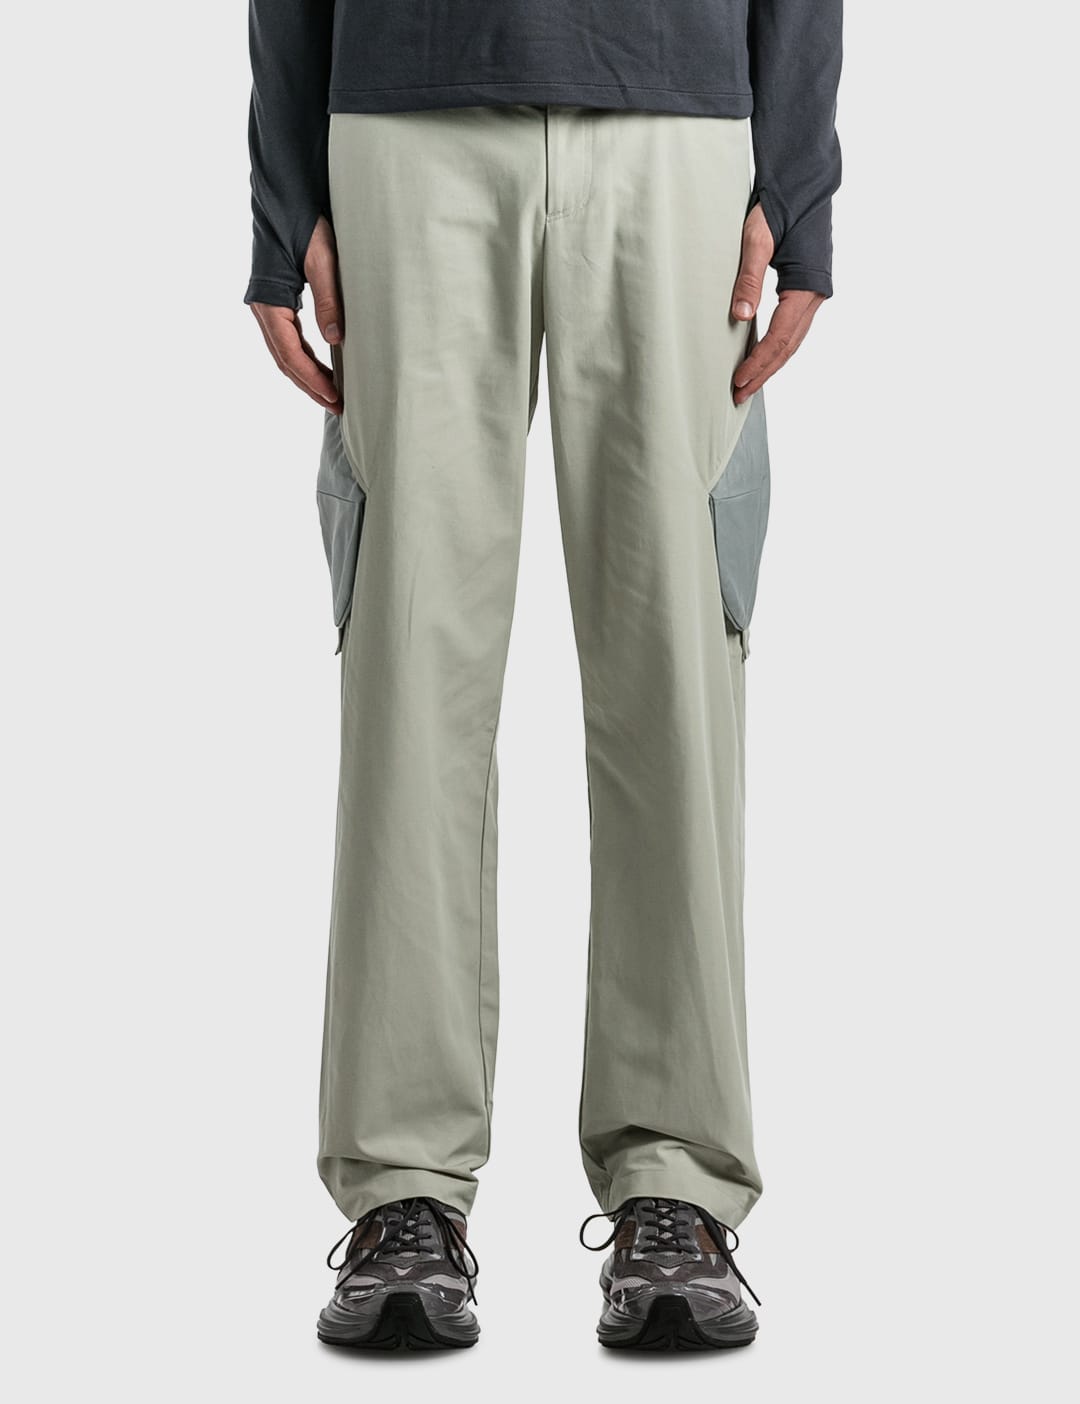 POST ARCHIVE FACTION (PAF) - 5.0 TROUSERS CENTER | HBX - Globally 